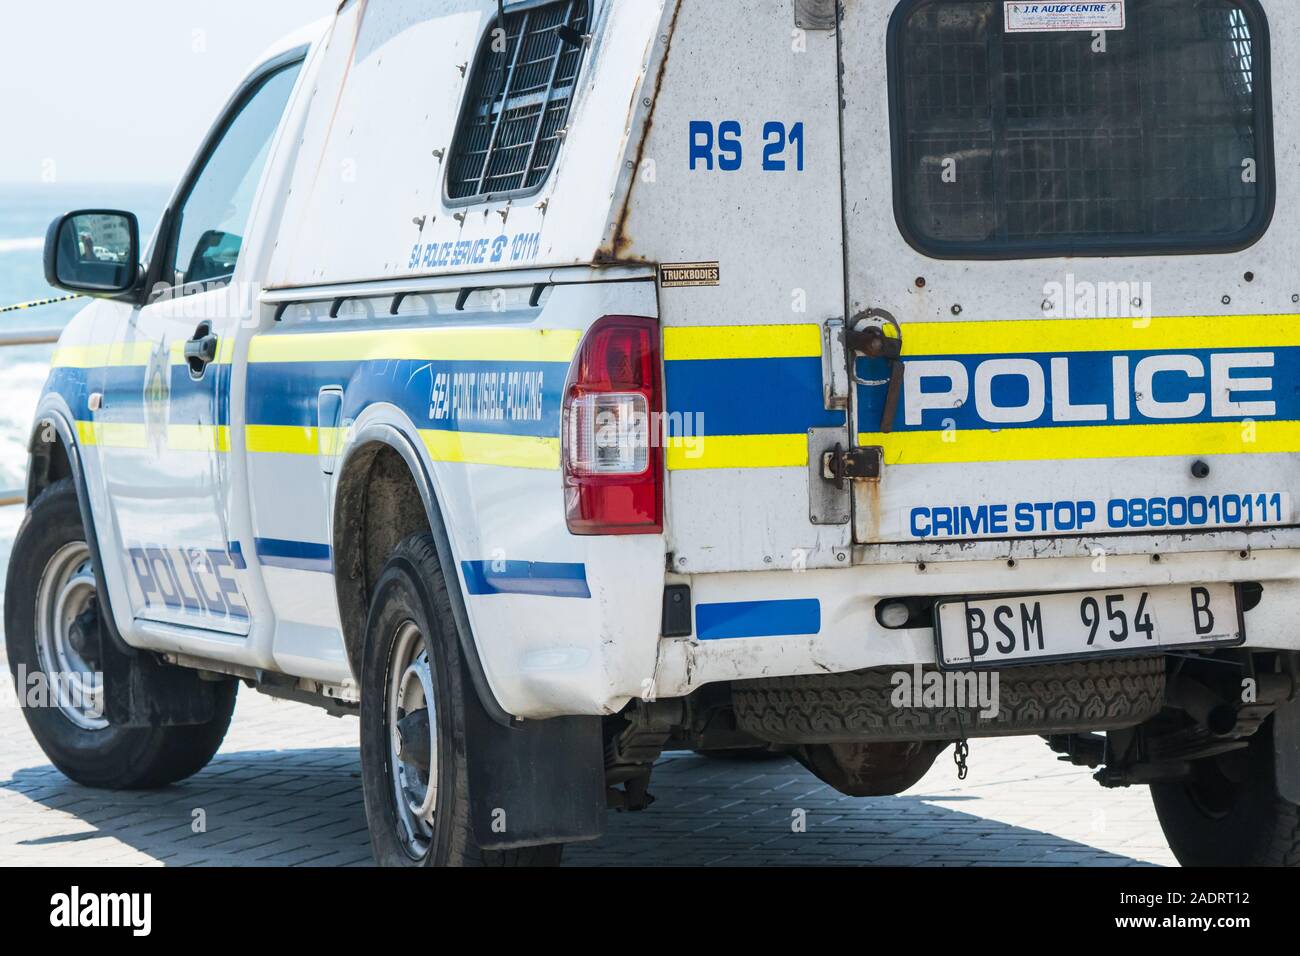 South African police van or vehicle parked in the street concept emergency services, public safety, security, law and order, policing visibility Stock Photo